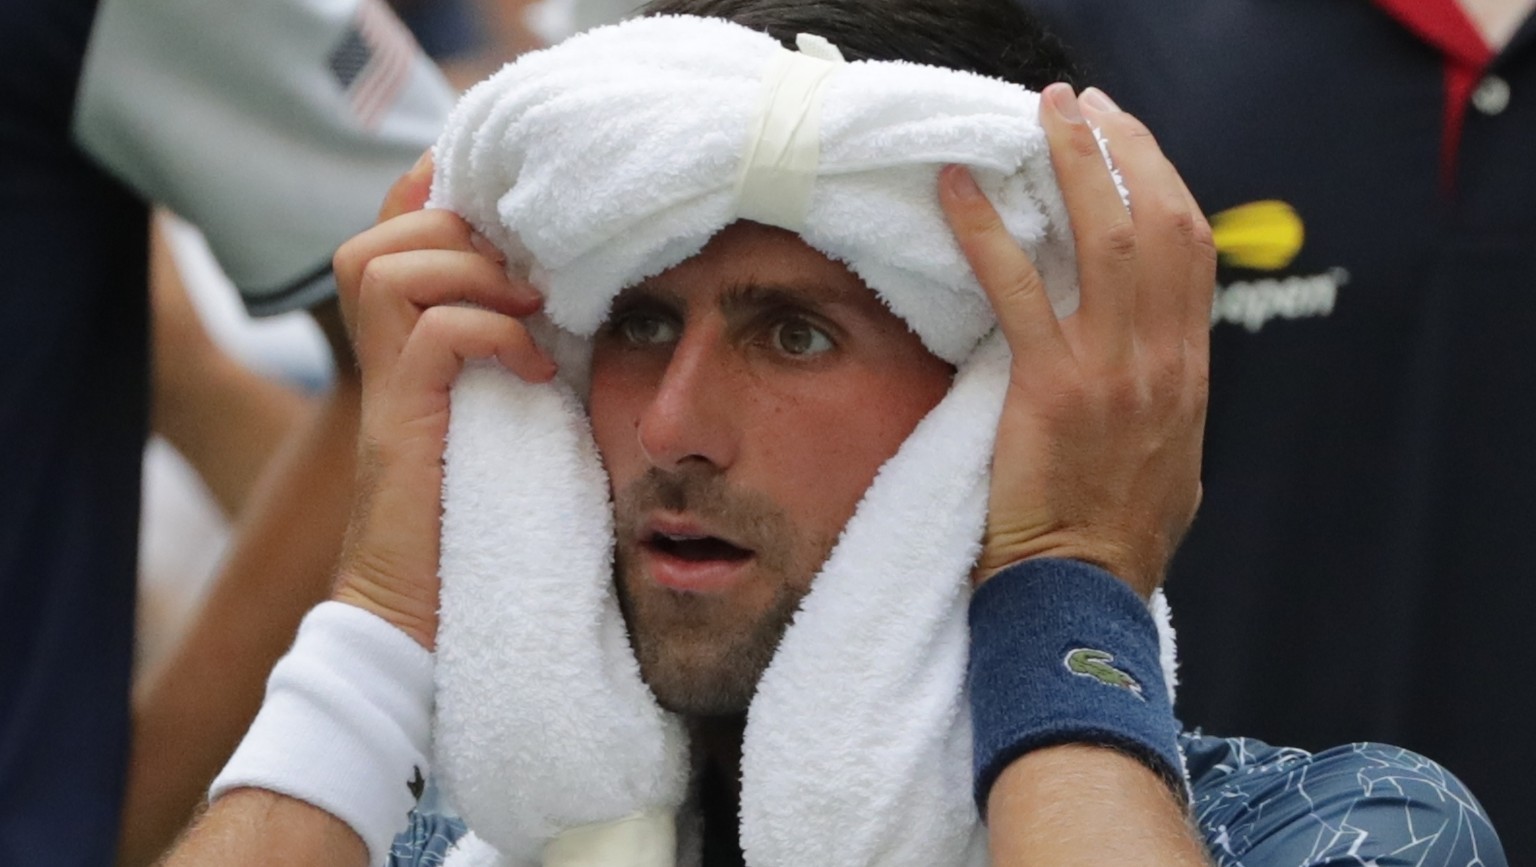 Novak Djokovic, of Serbia, uses ice towels to cool off during a changeover in his match against Marton Fucsovics, of Hungary, during the first round of the U.S. Open tennis tournament, Tuesday, Aug. 2 ...